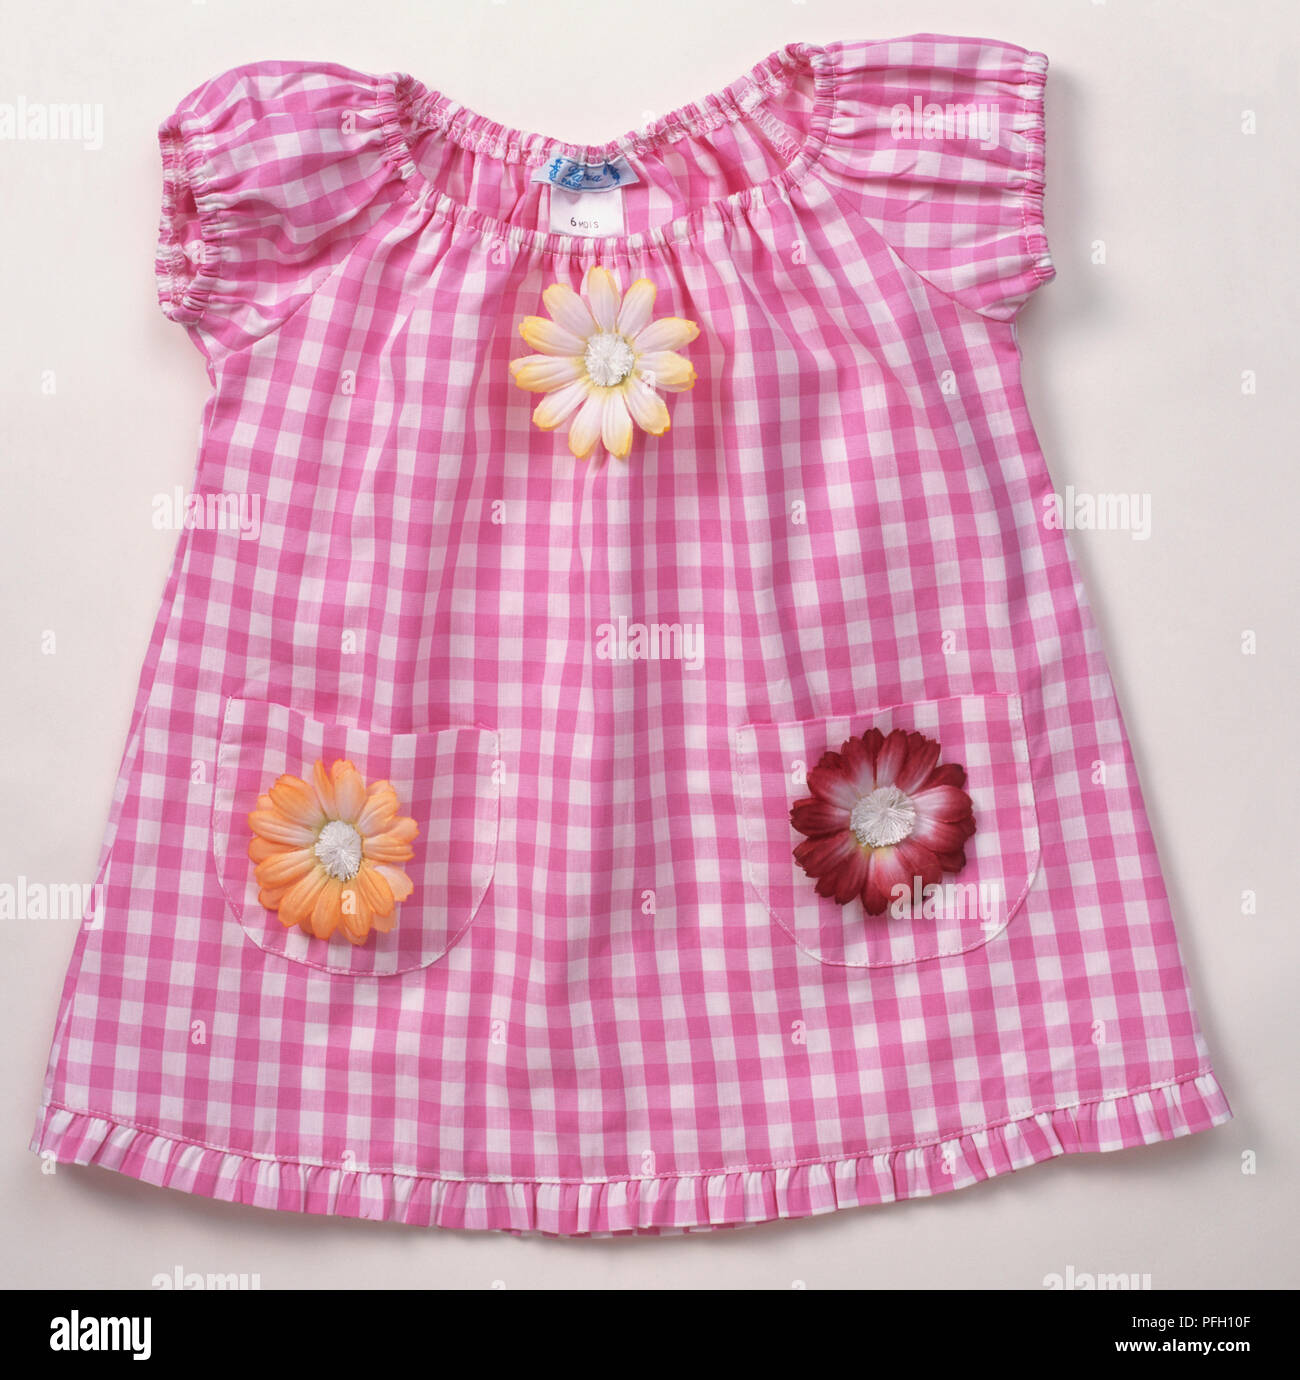 Share 171+ baby gown neck design latest